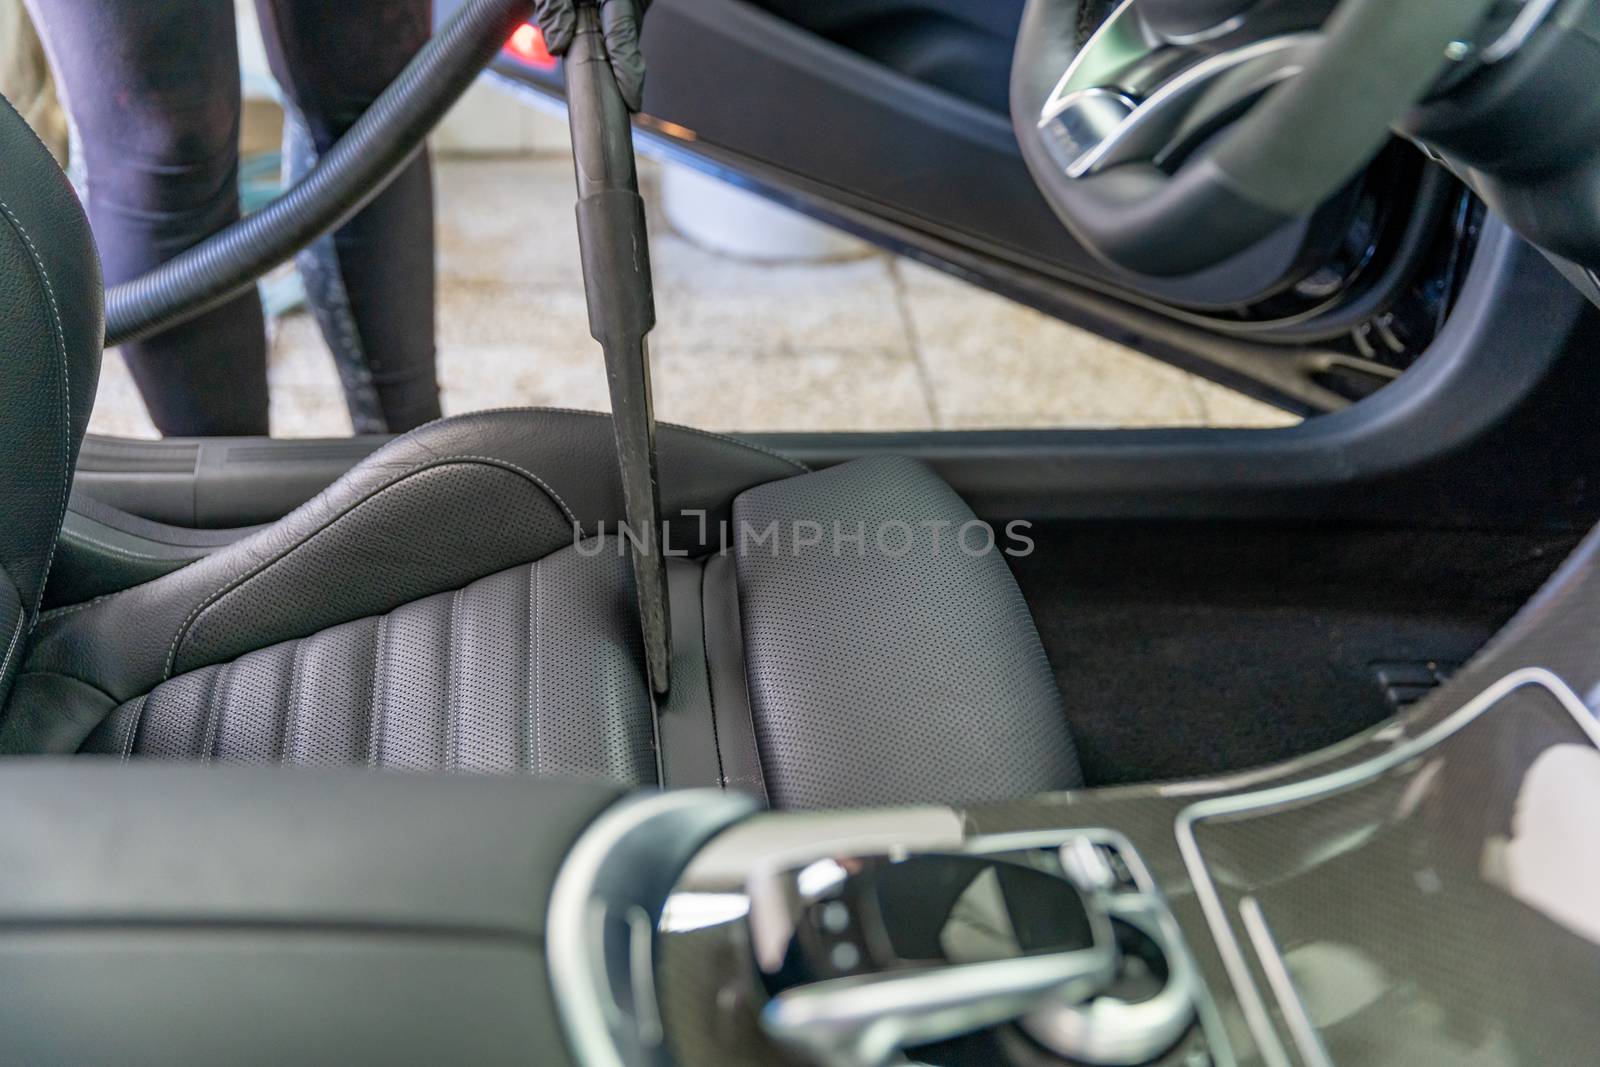 vacuuming the interior of a luxury car in the garage.